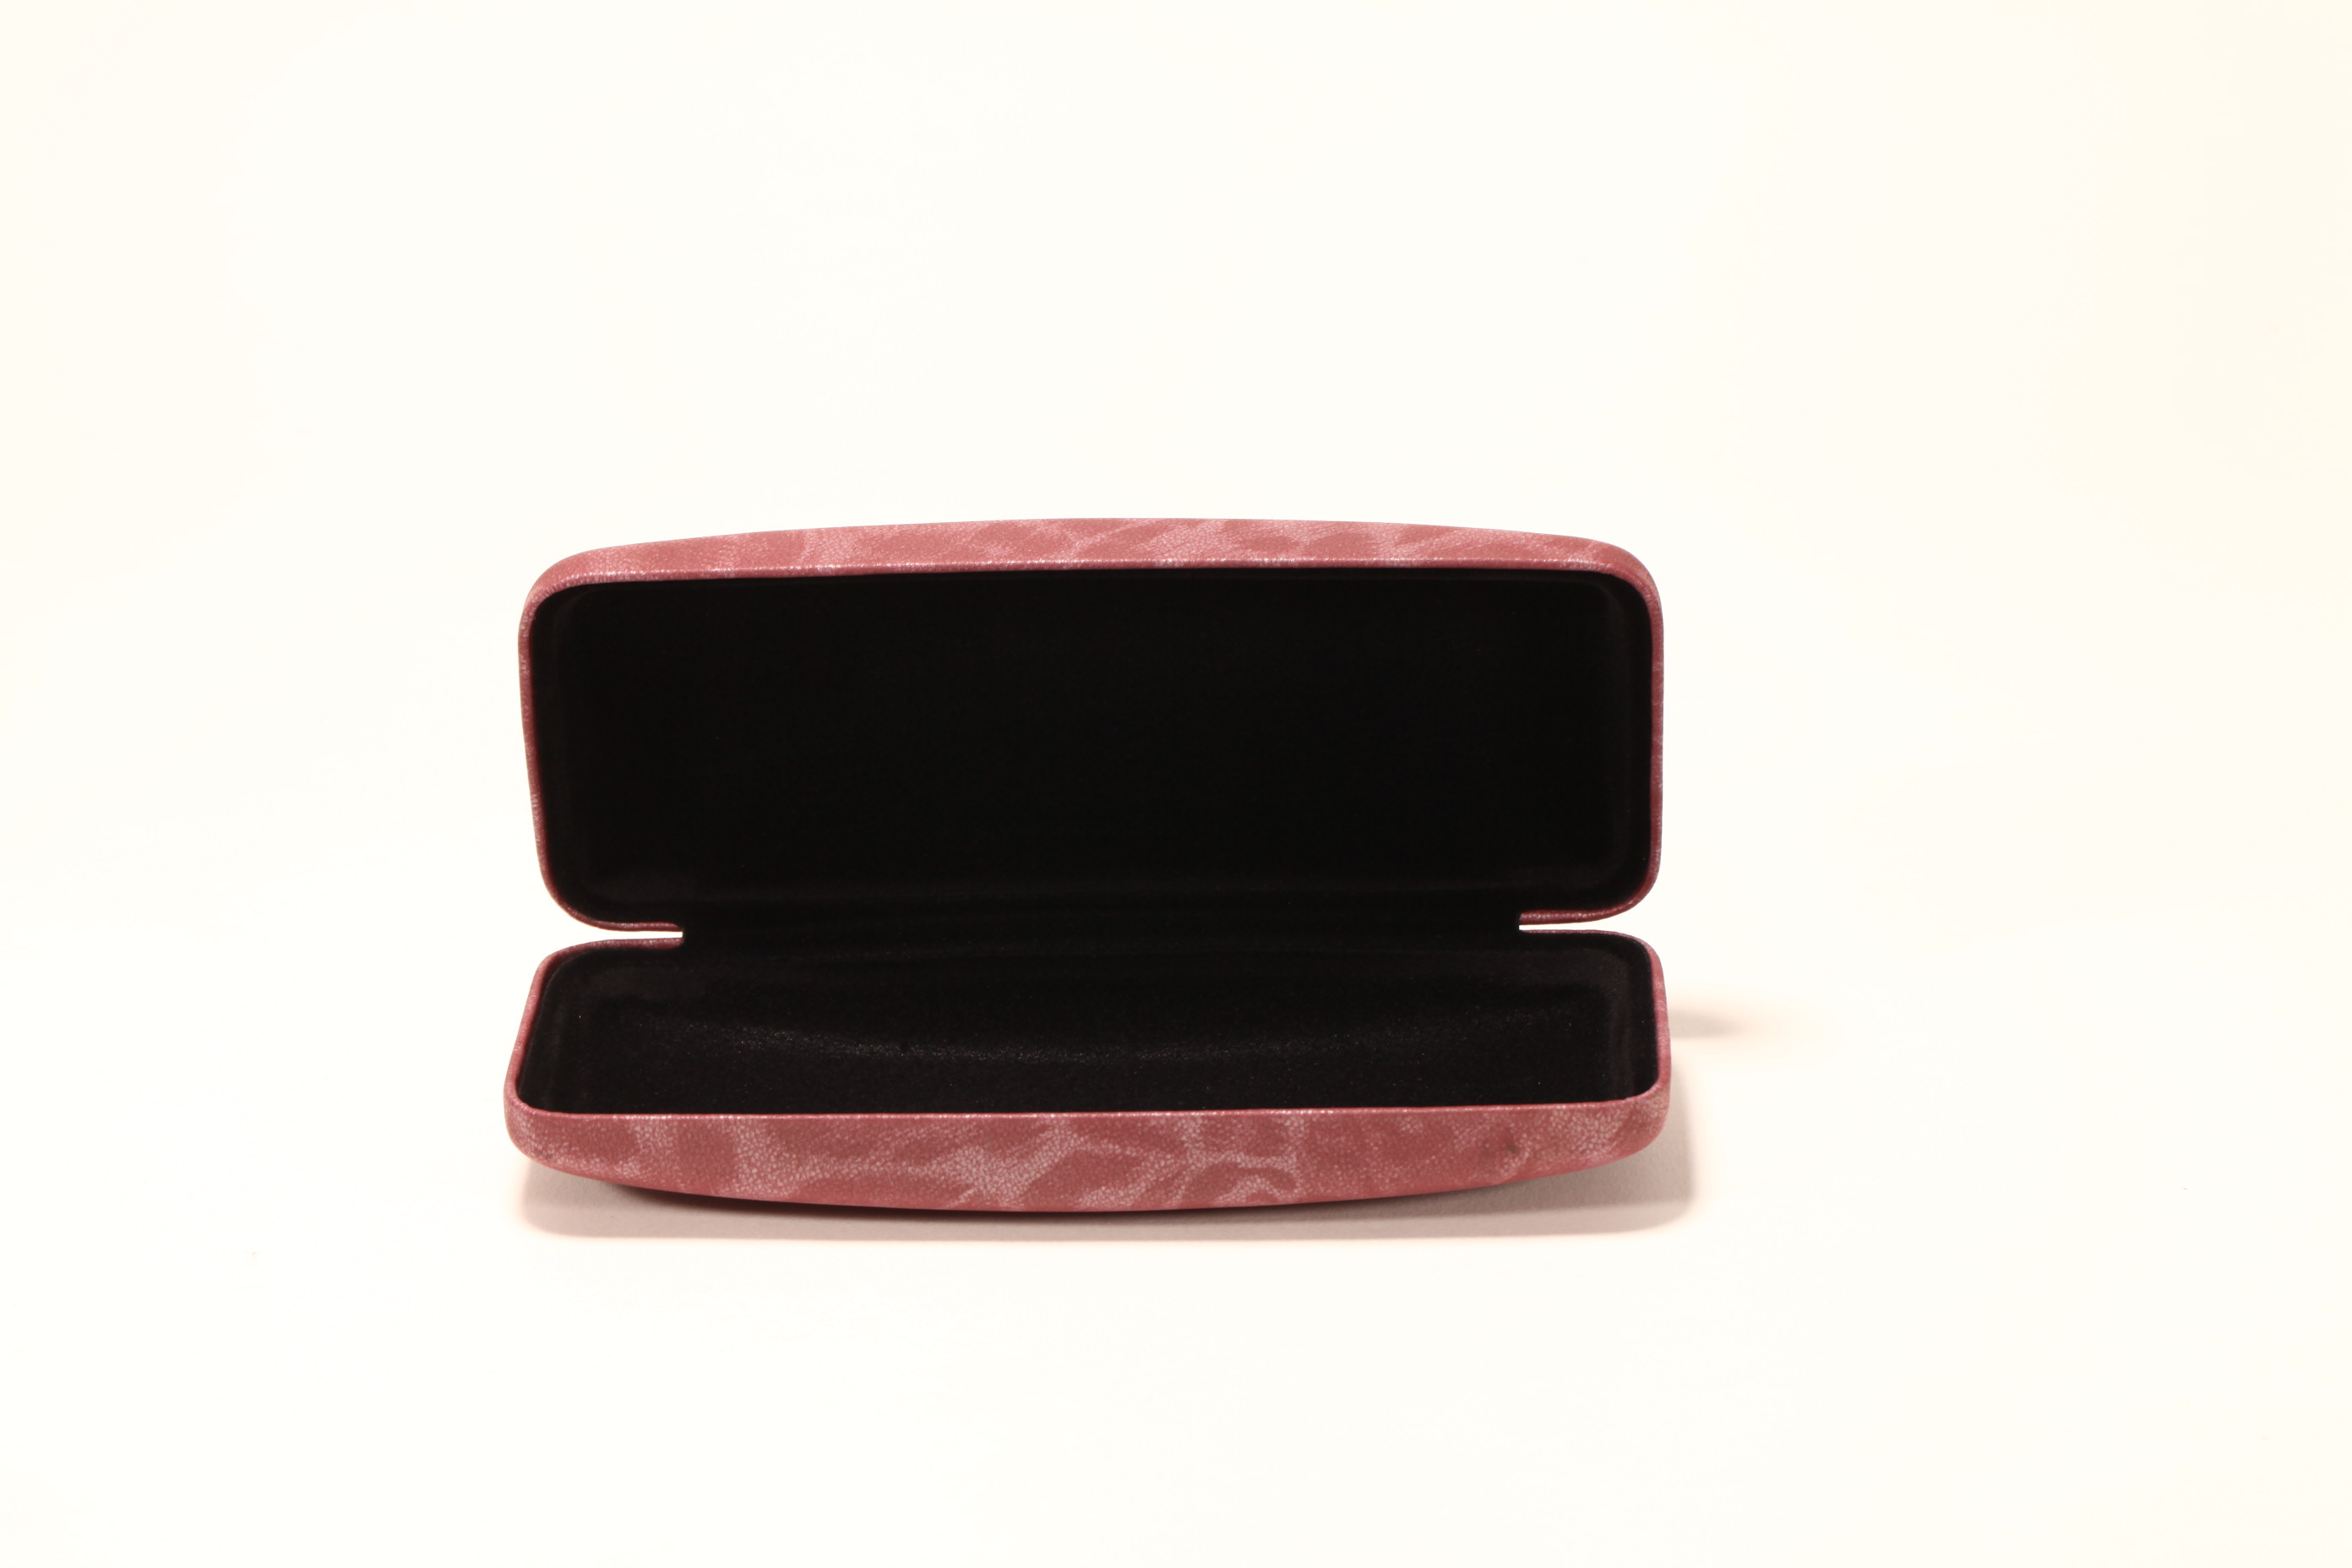 Two types of glasses case